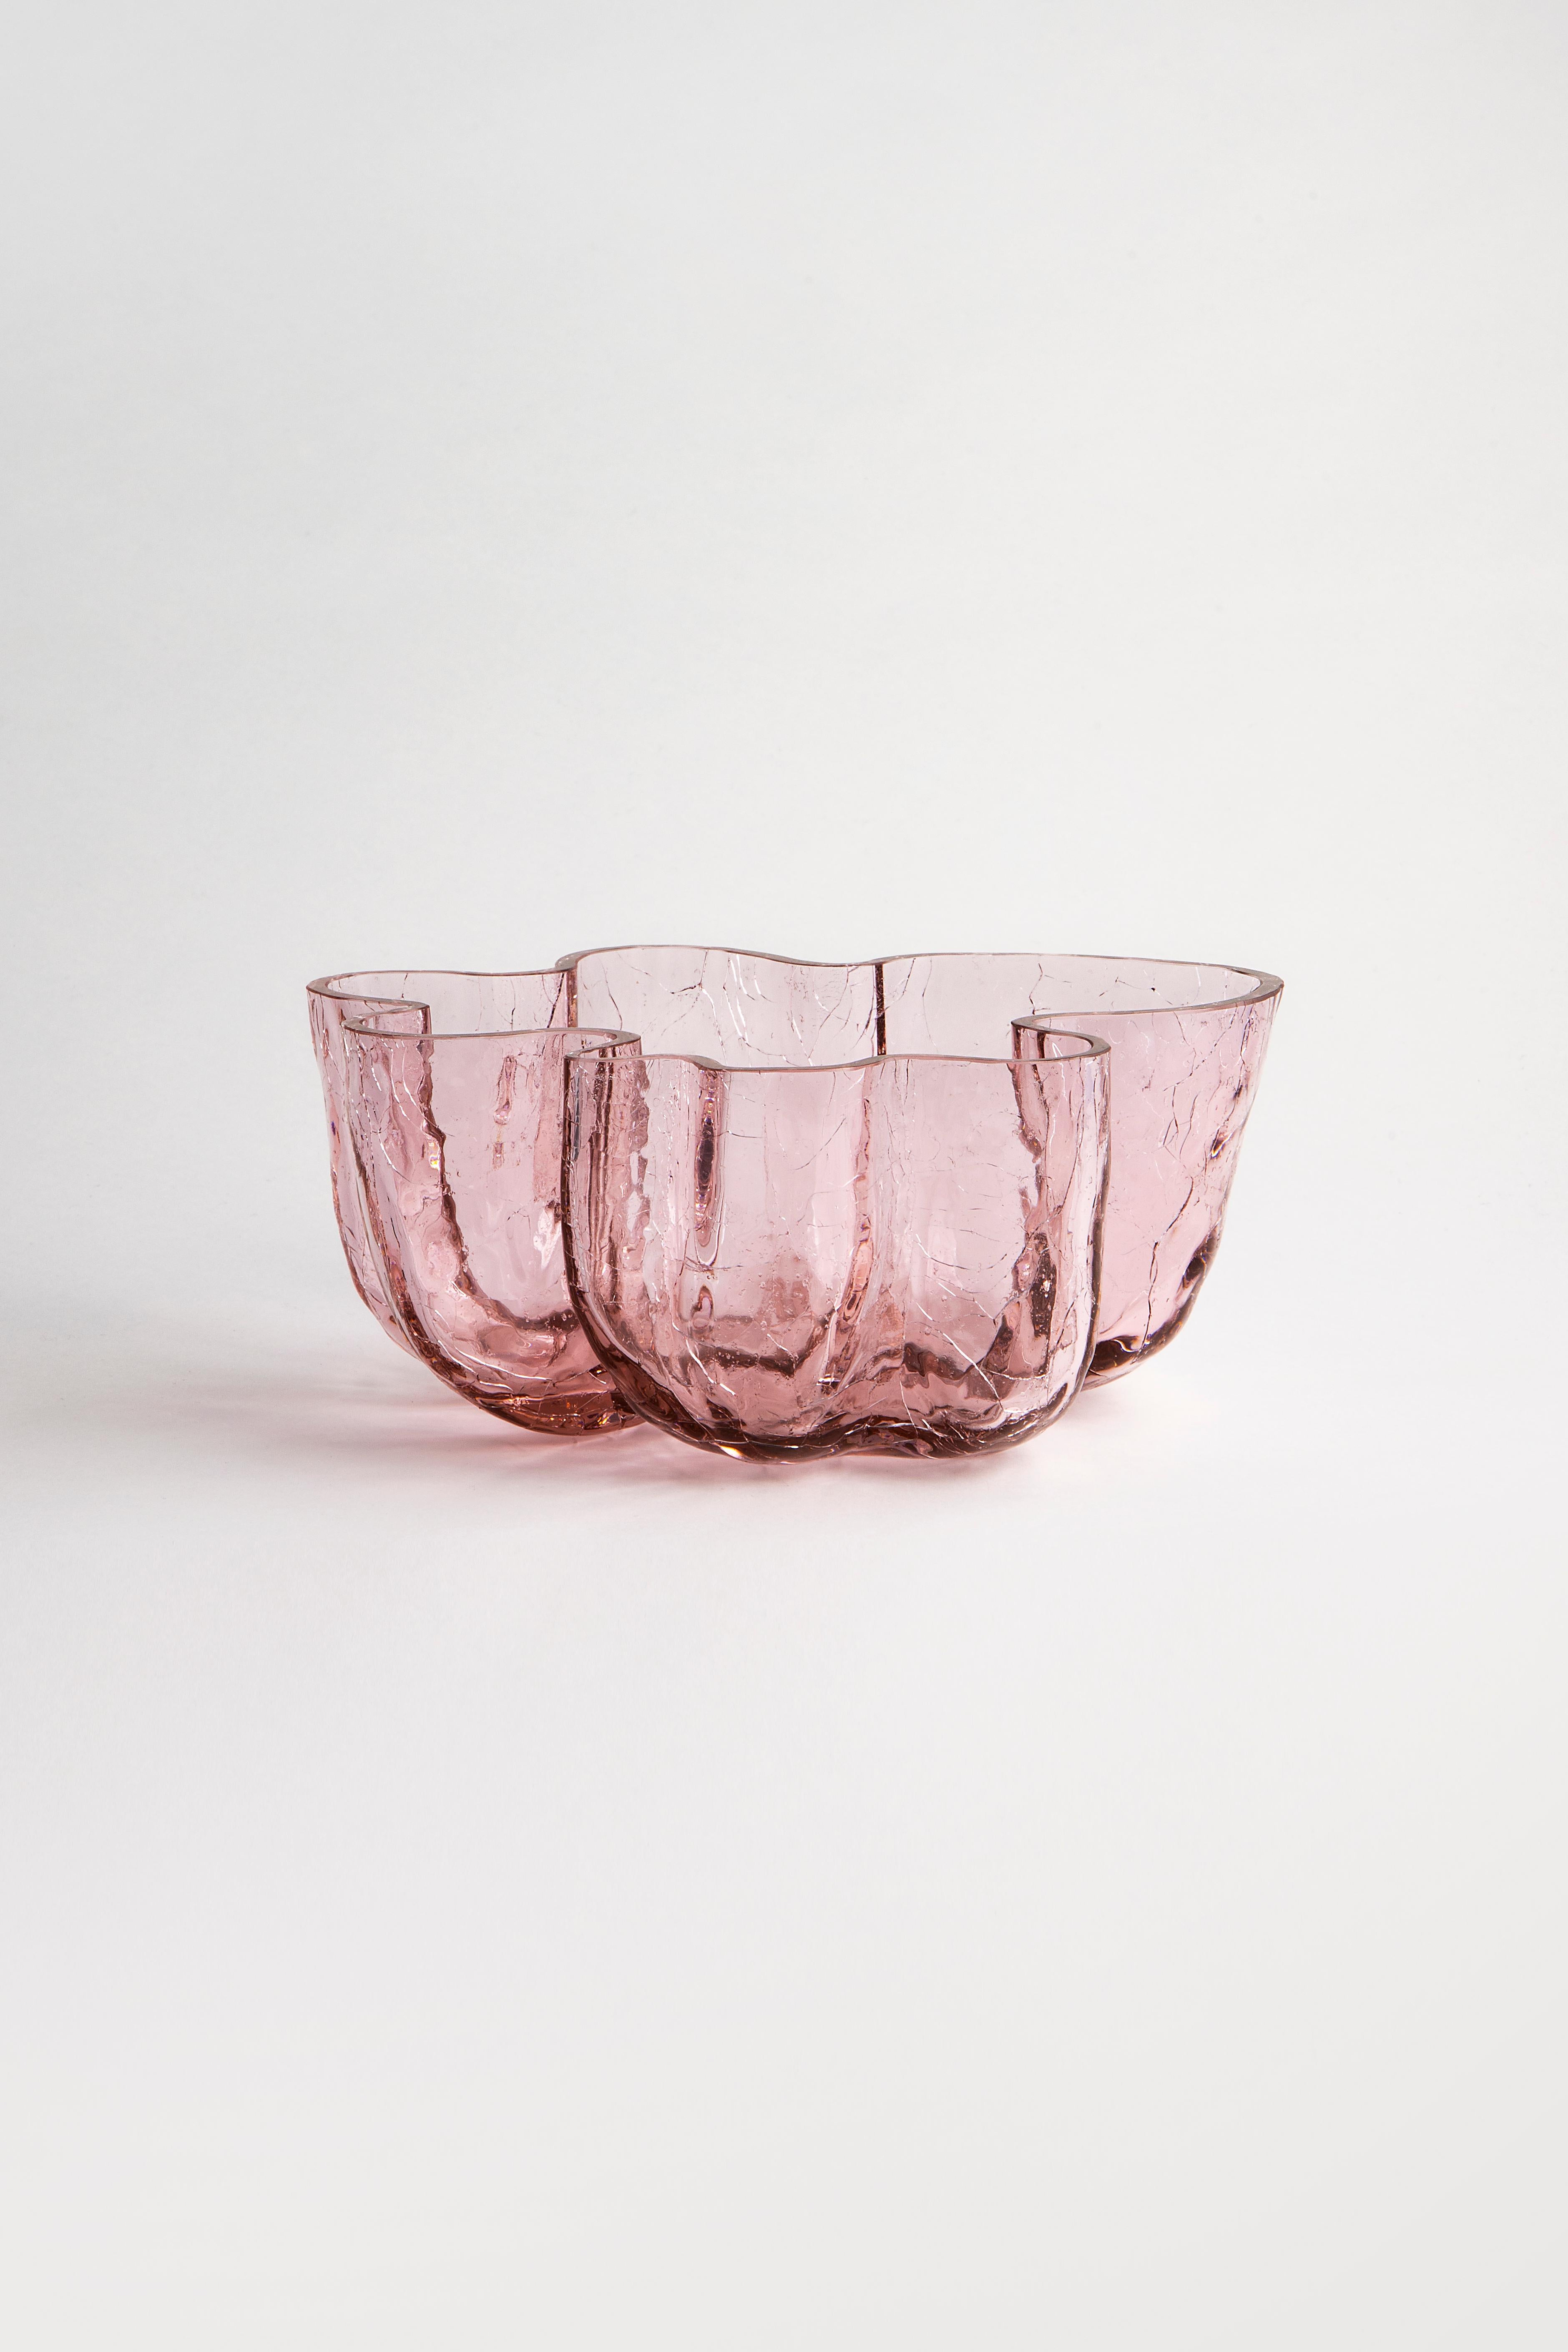 Crackle and thunder – a magical wonder! At Kosta Boda, we marvel at beautifully preserved cracks in glass. The pink bowl from the Crackle collection has an expressive, sculptural exterior created using an old handicraft technique where the hot glass